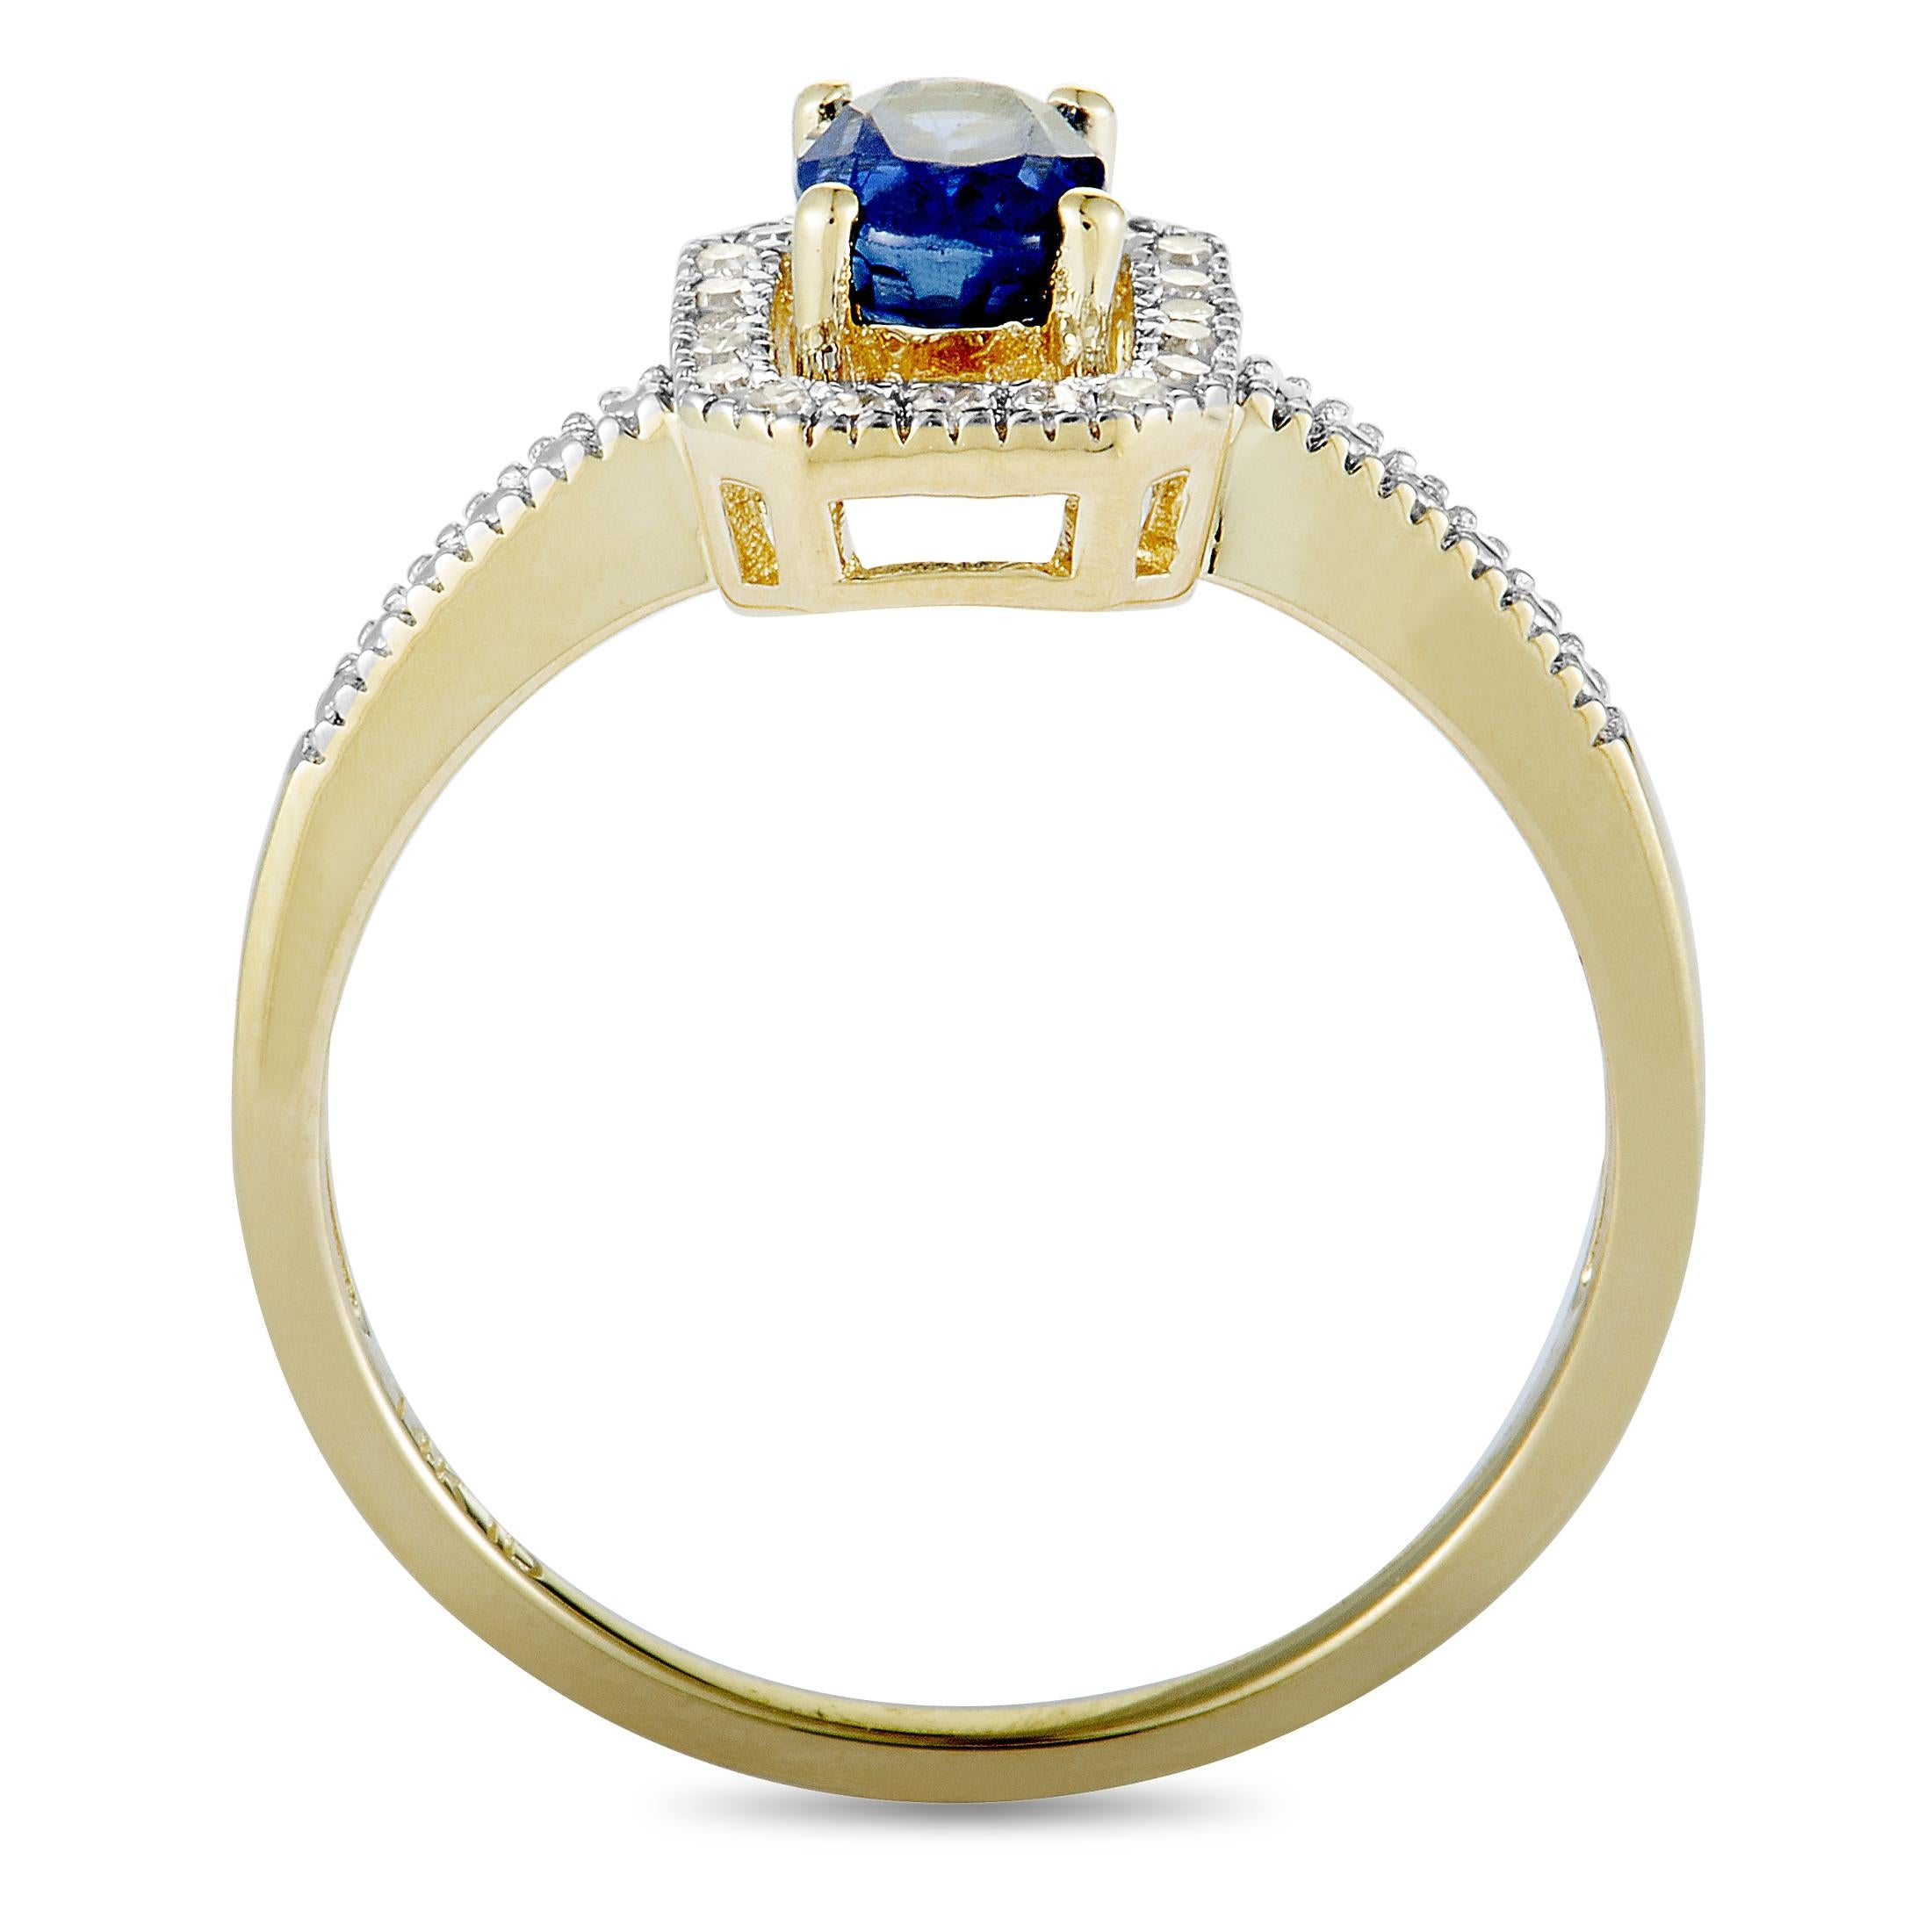 This ring is made of 14K yellow gold and weighs 2.3 grams, boasting band thickness of 1 mm and top height of 6 mm, while top dimensions measure 19 by 9 mm. The ring is set with a sapphire and with a total of 0.12 carats of diamonds.
 
 Offered in